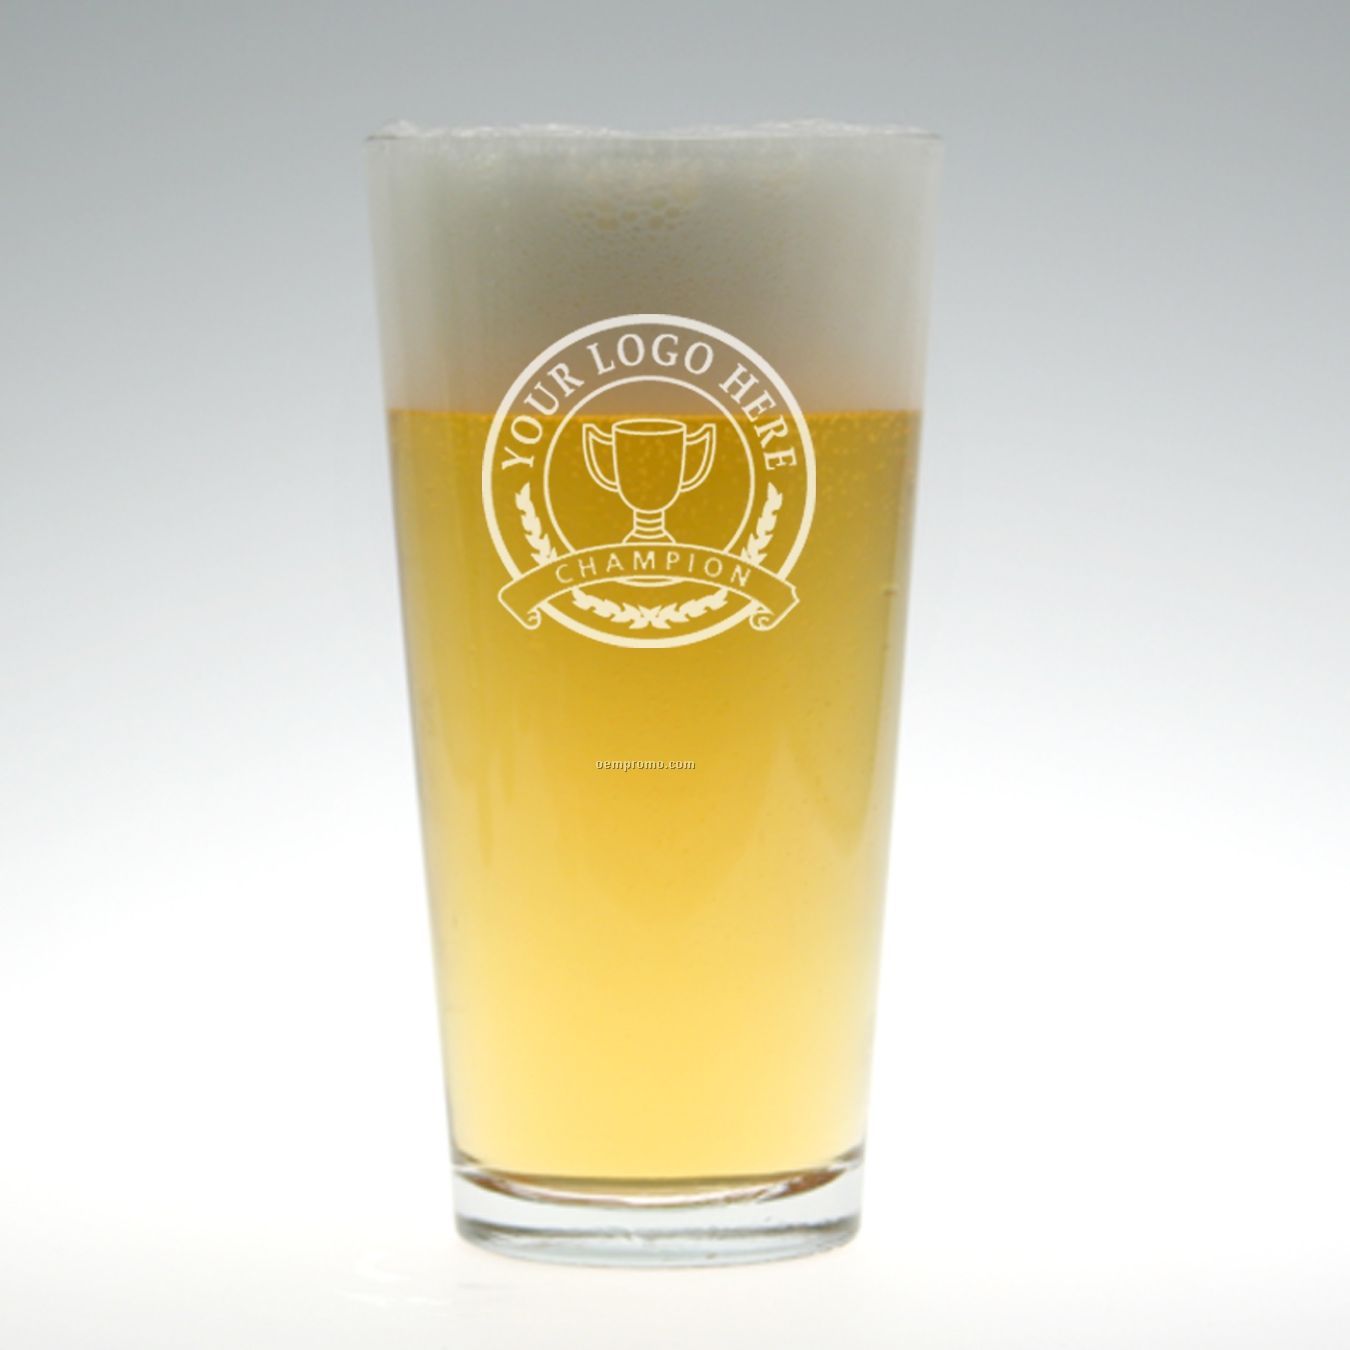 16 Oz. Selection Ale Beer Glass (Deep Etch)